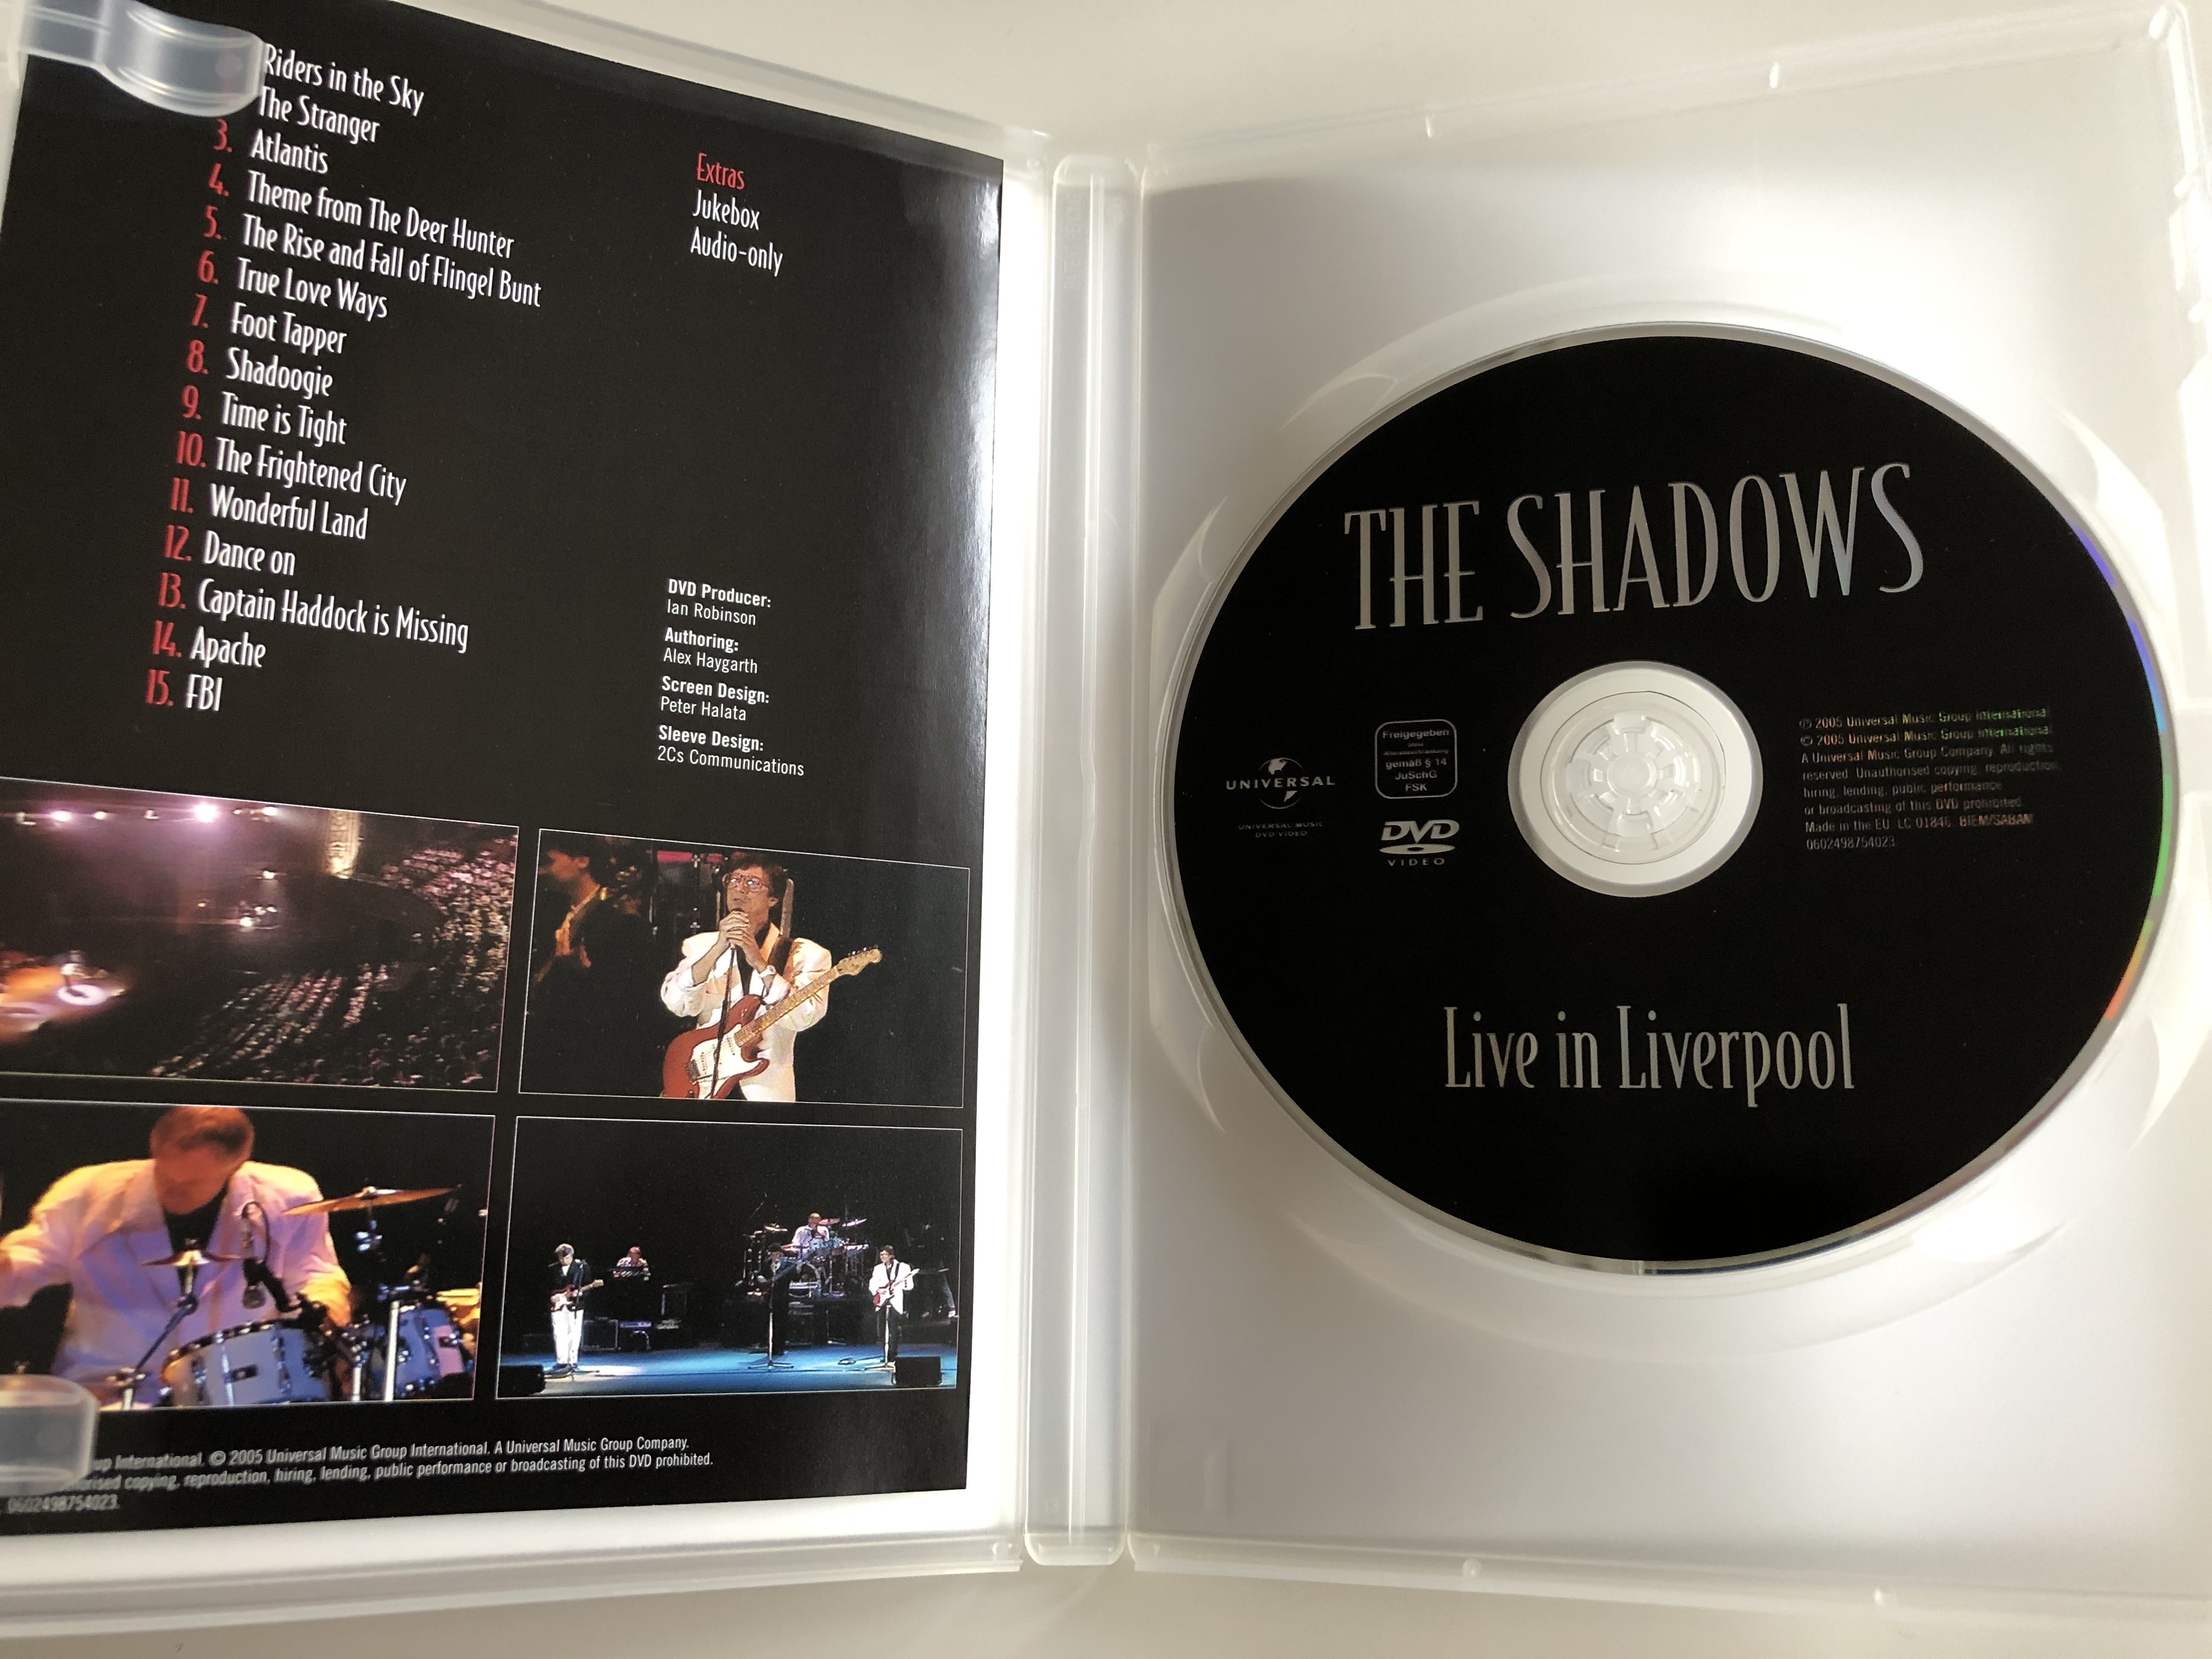 the-shadows-live-in-liverpool-dvd-2005-including-the-classic-hits-apache-wonderful-land-dance-on-and-fbi-2.jpg